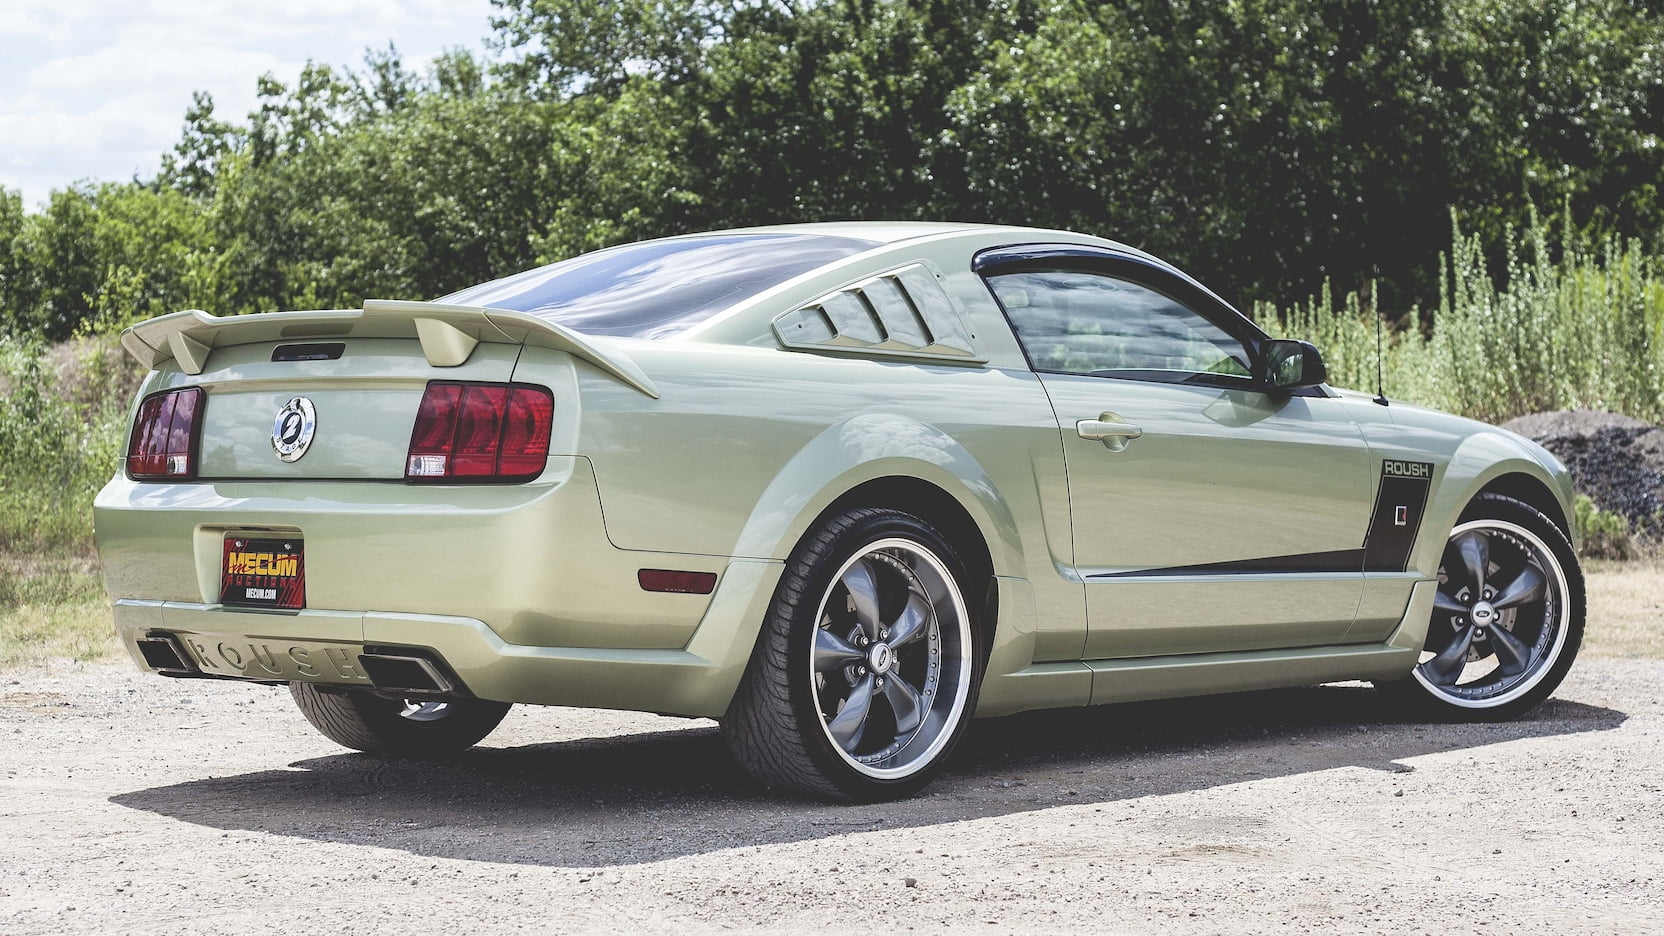 Legend Lime 2005 Ford Mustang